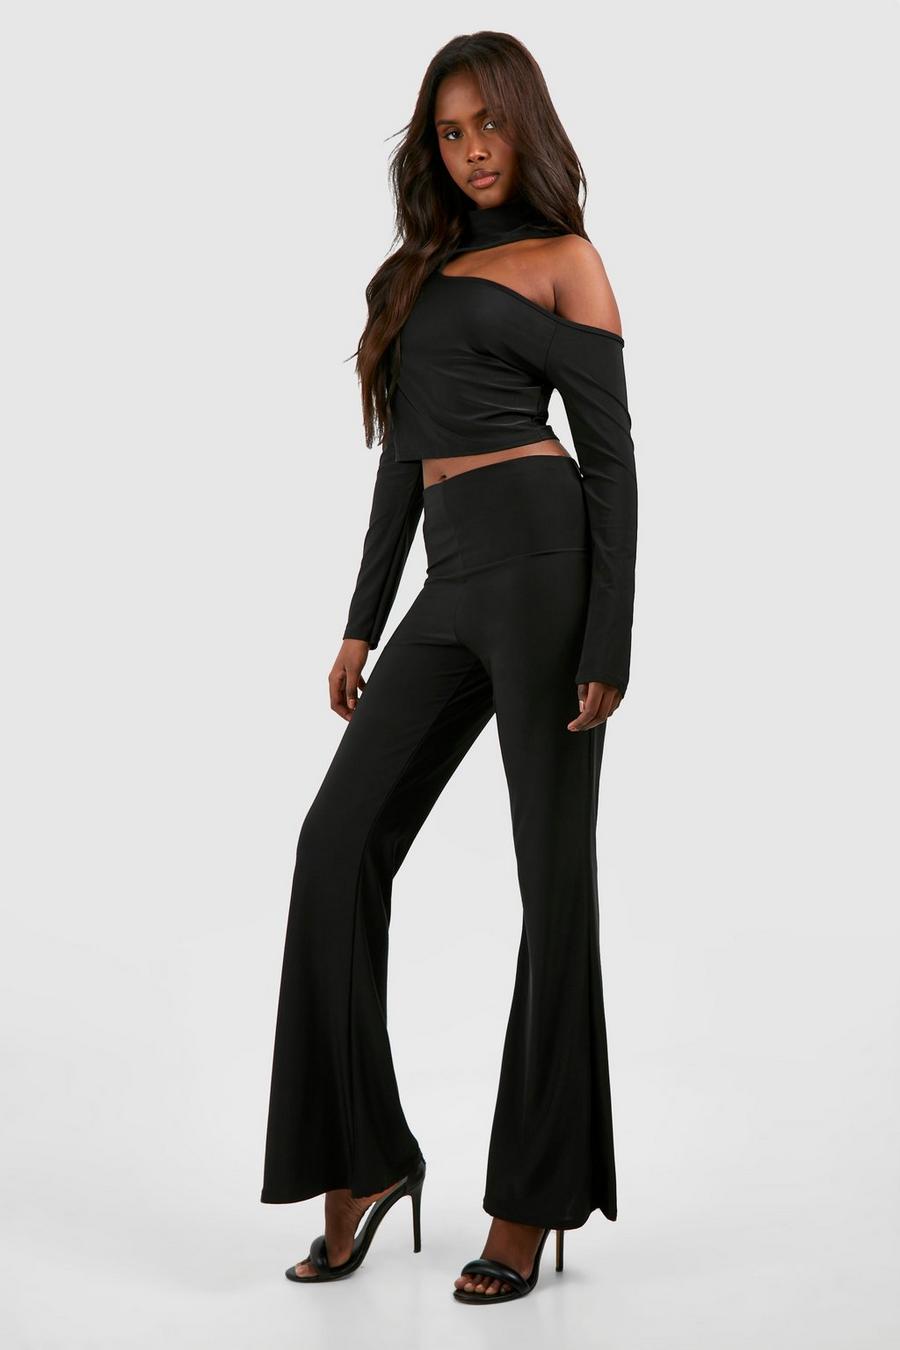 Black High Neck Cut Out Long Sleeve Top & Flared Trouser